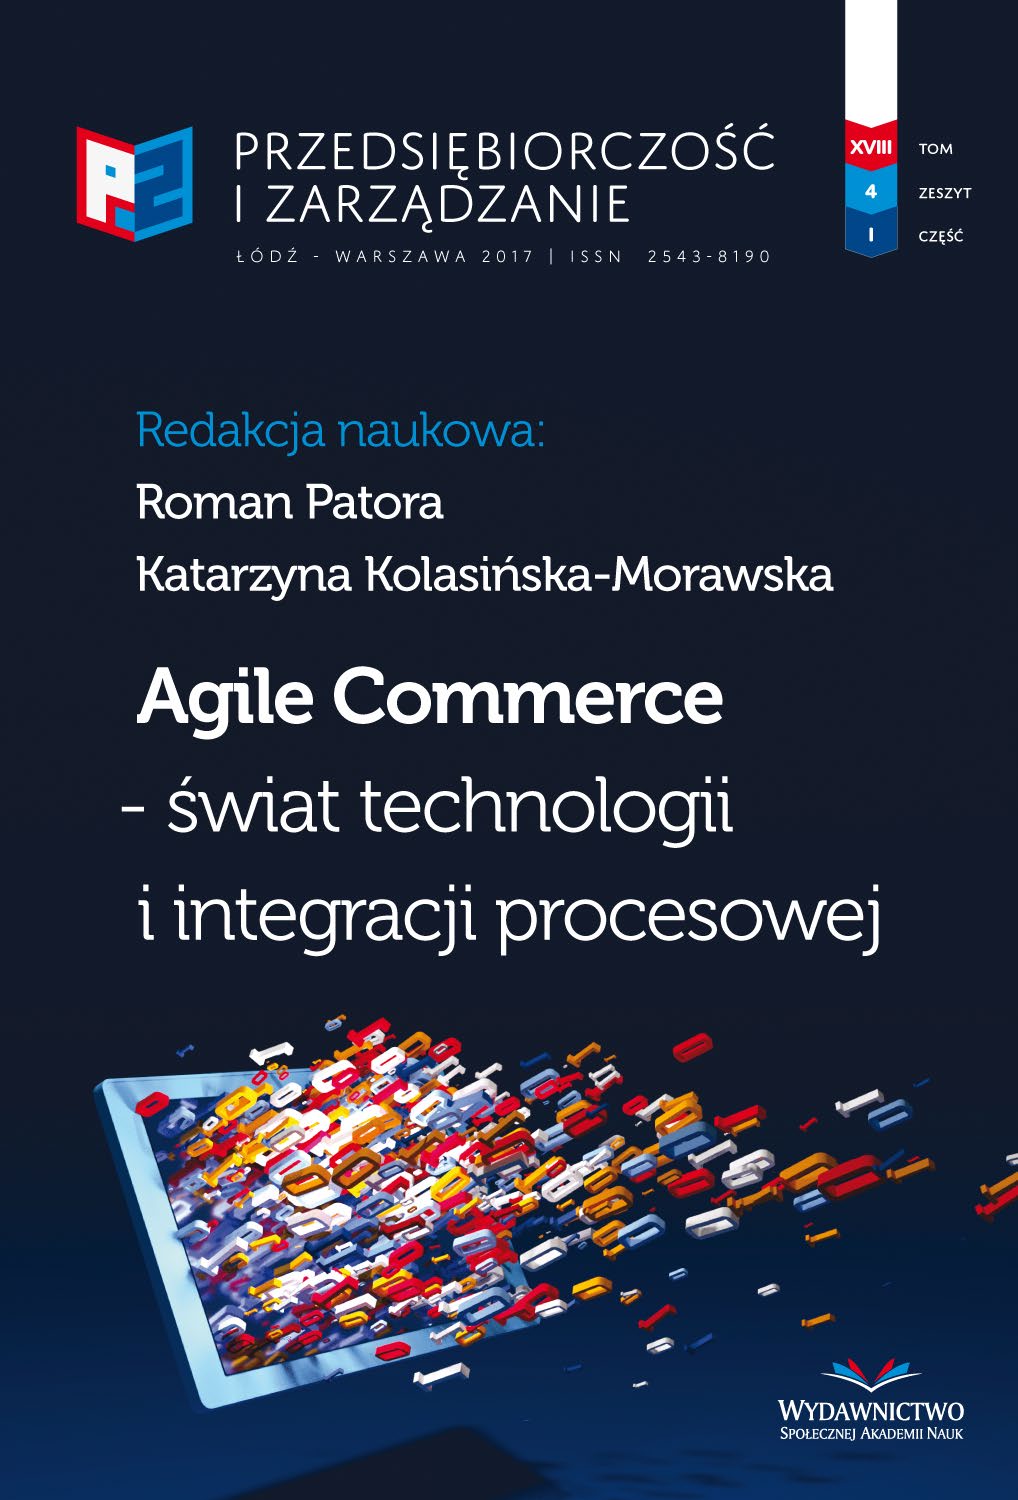 Mobile Banking in Poland — a Review of Applications, Ranking,
Development Opportunities Cover Image